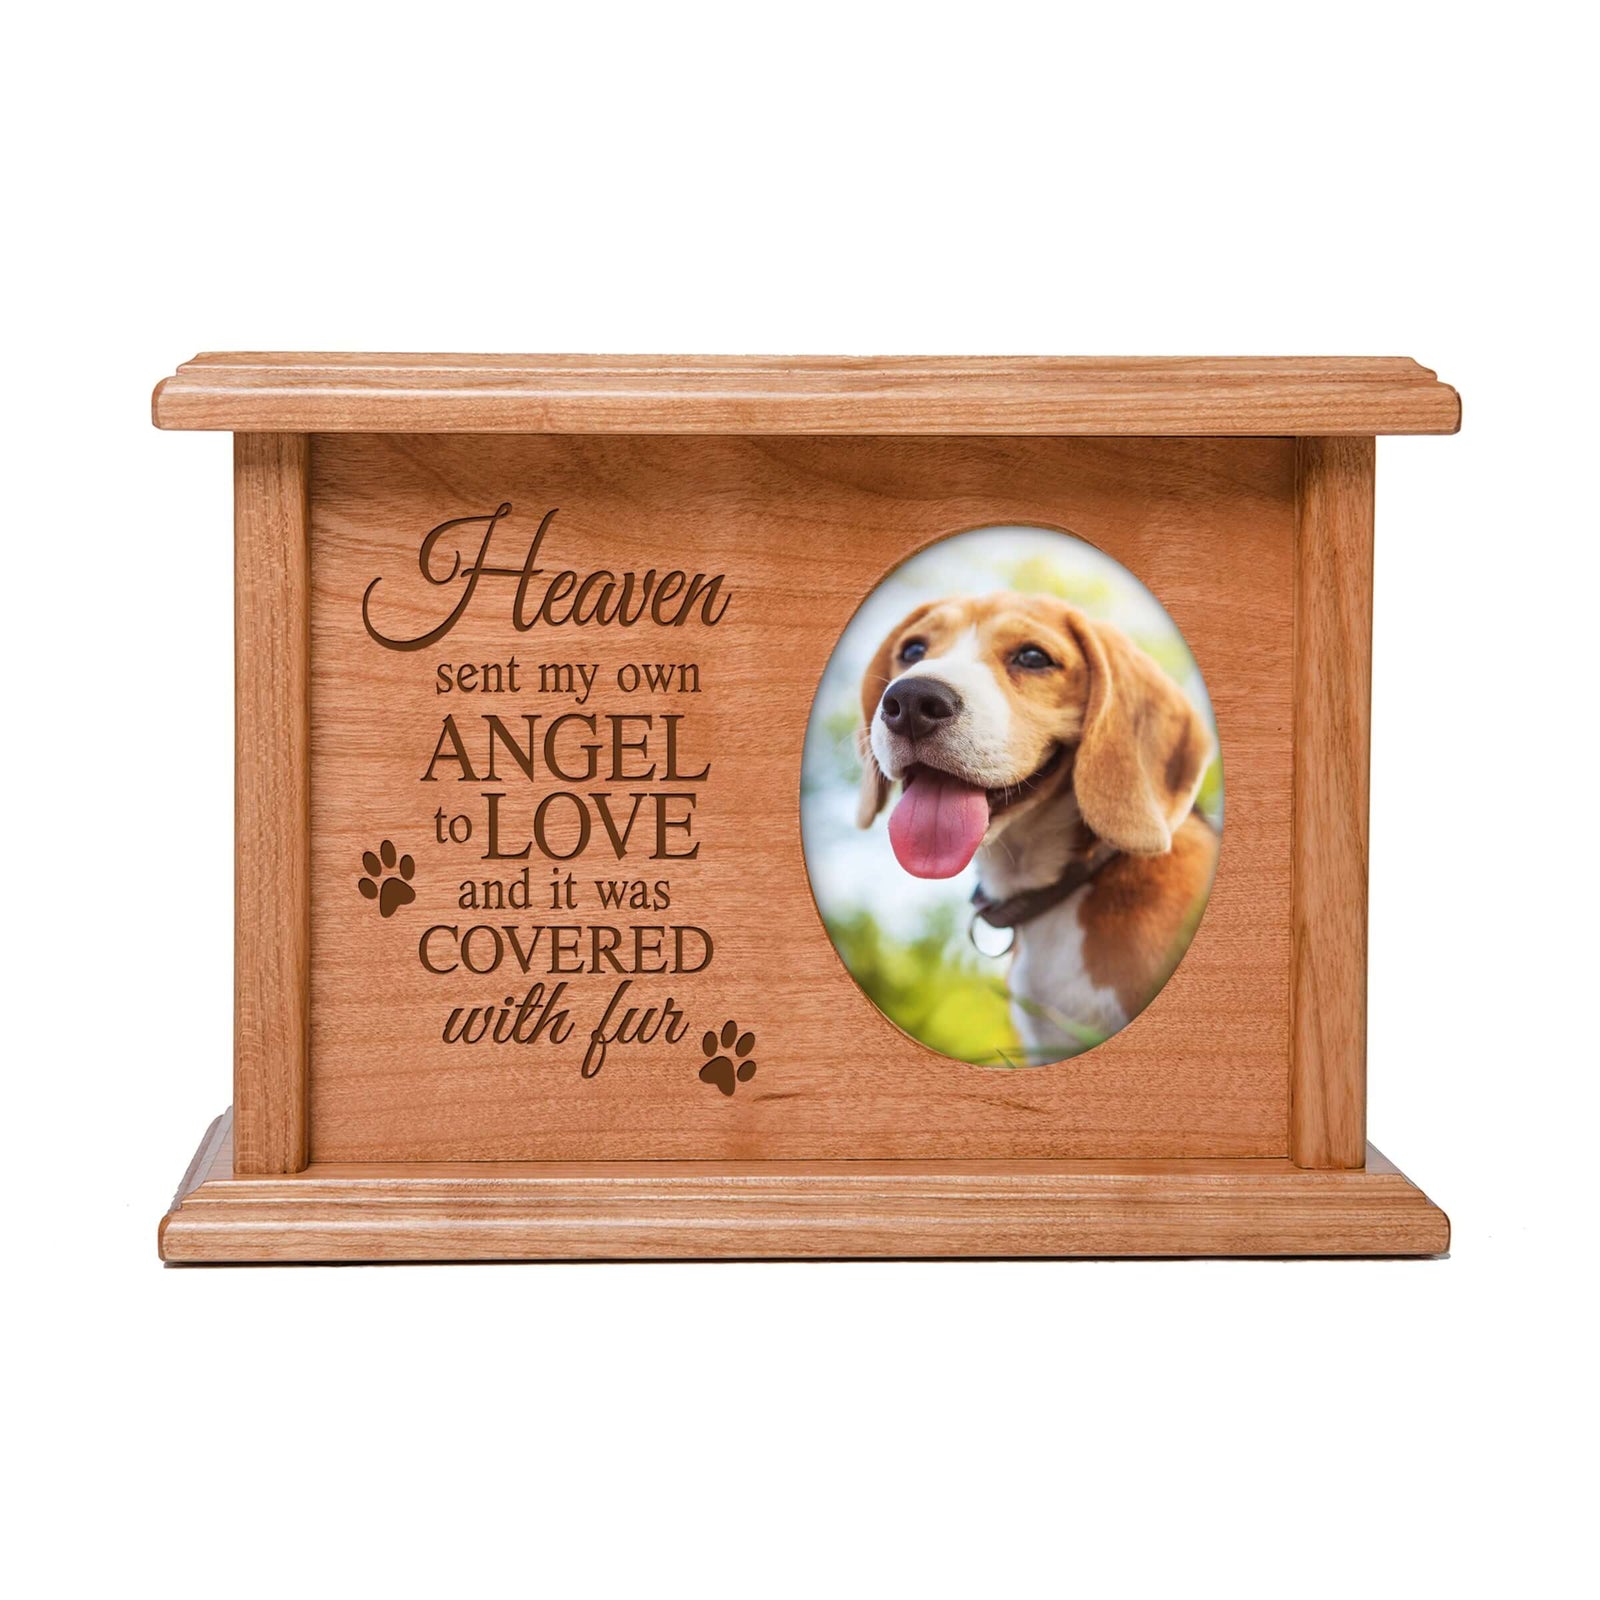 Pet Memorial Picture Cremation Urn Box for Dog or Cat - Heaven Sent My Own Angel